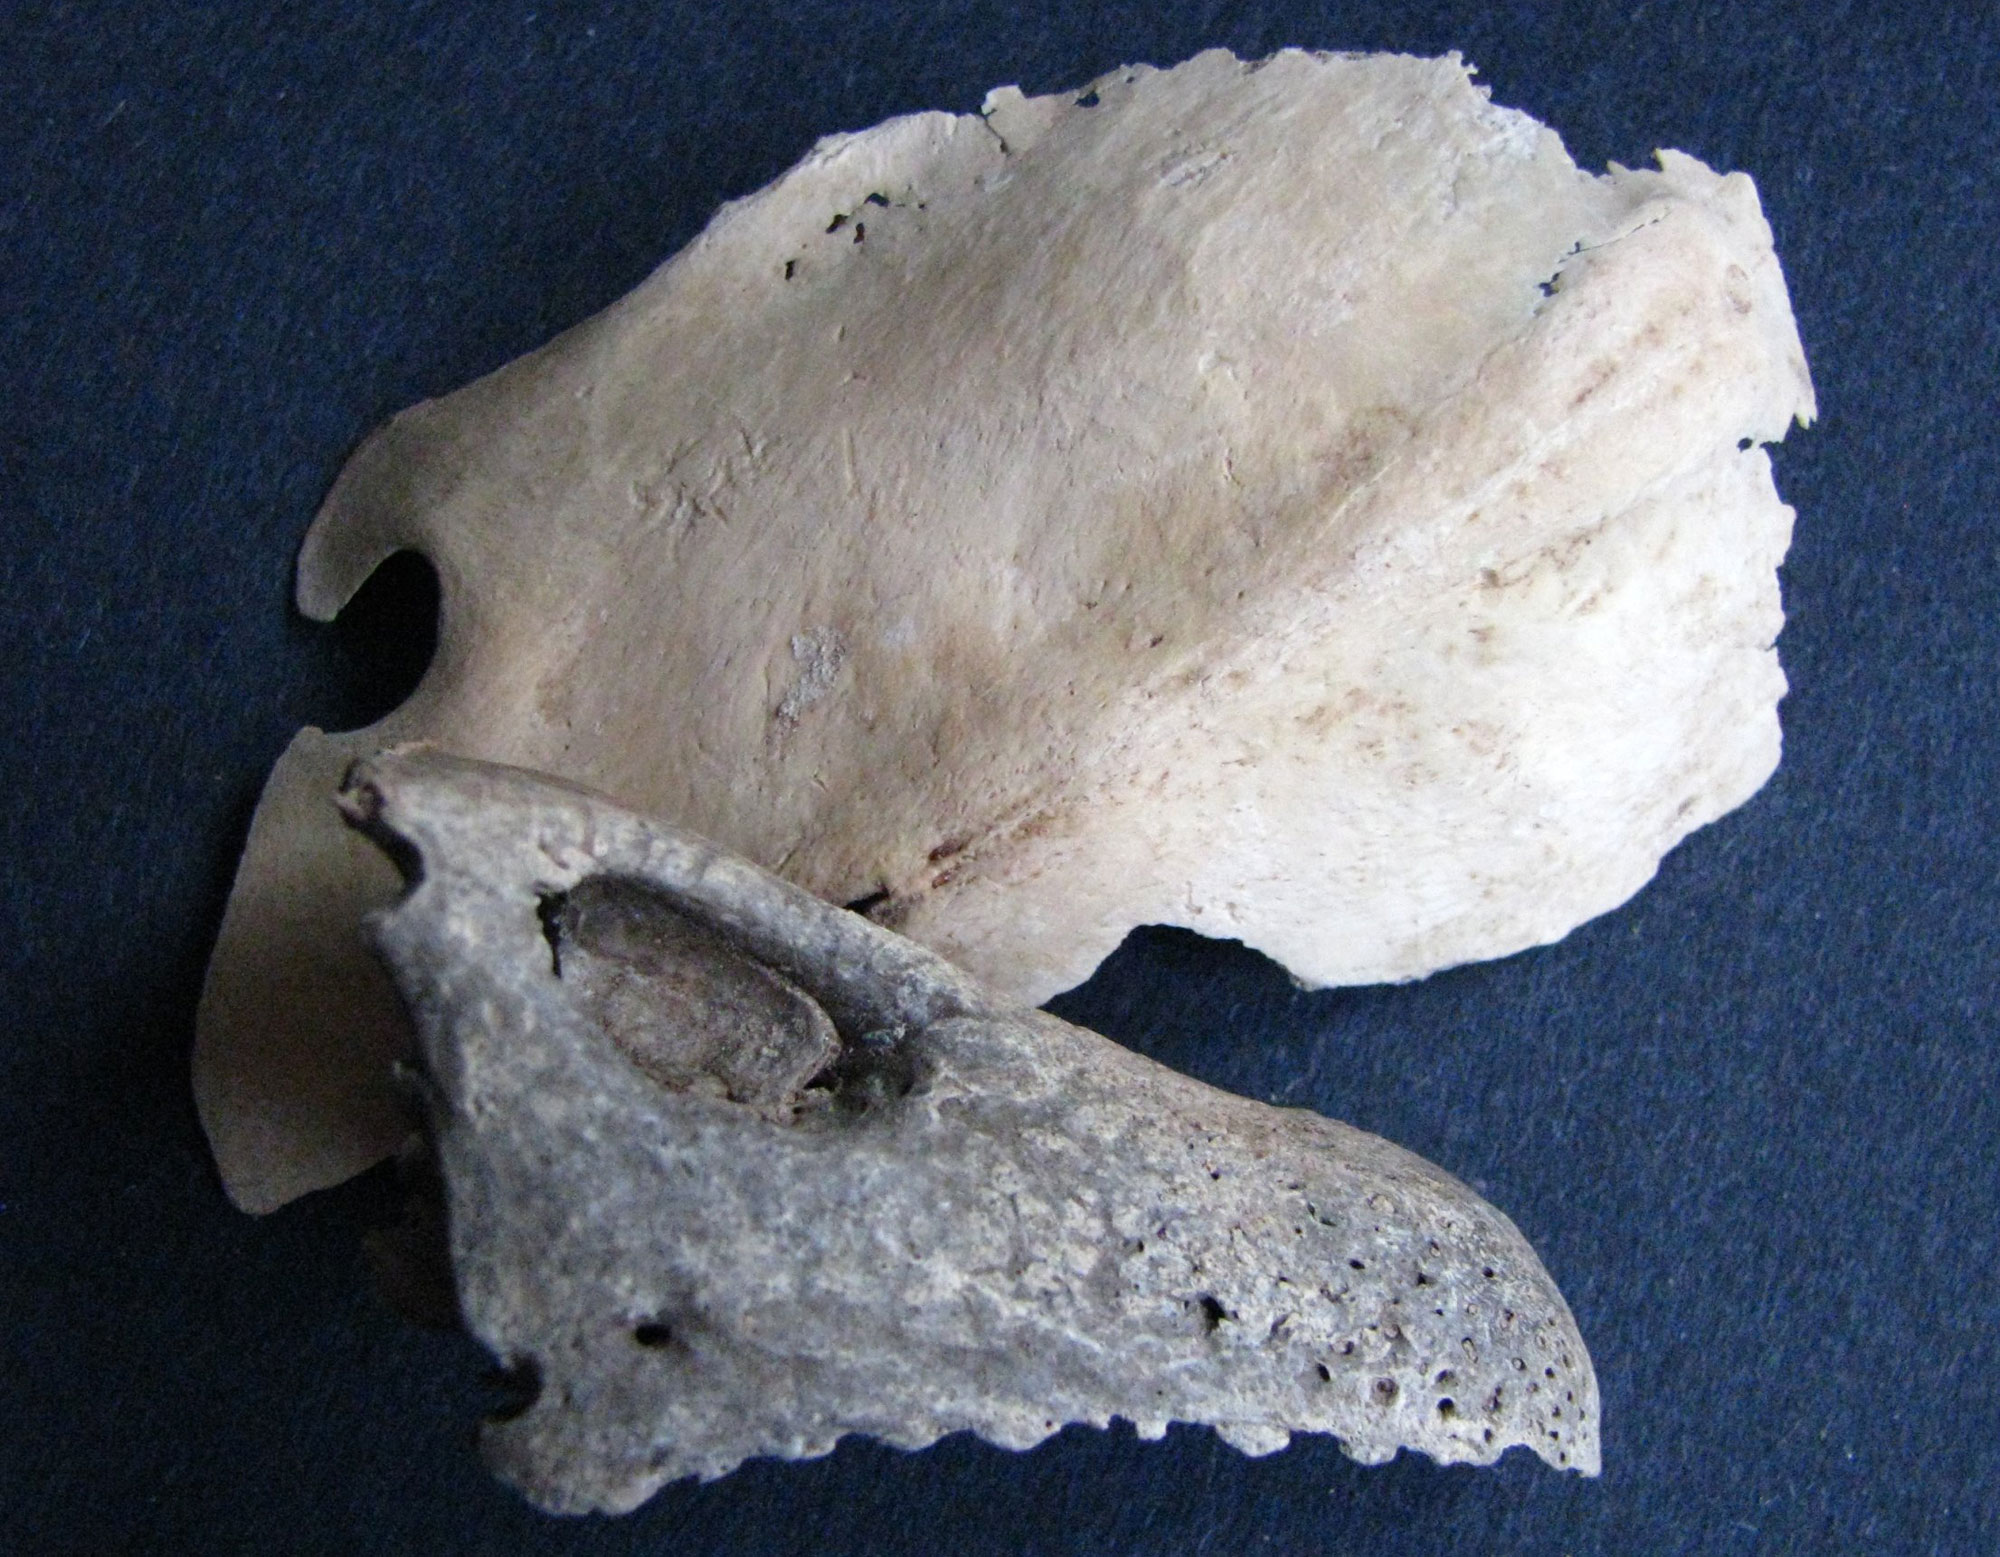 Photograph of the bones of an O'ahu moa nalo, a type of flightless duck. The bones are sitting on a blue cloth background. One bone appears to be the top park of the beak; it is gray in color and has a serrated edge. The other bone might be a sternum; it is off-white in color and relatively flat.